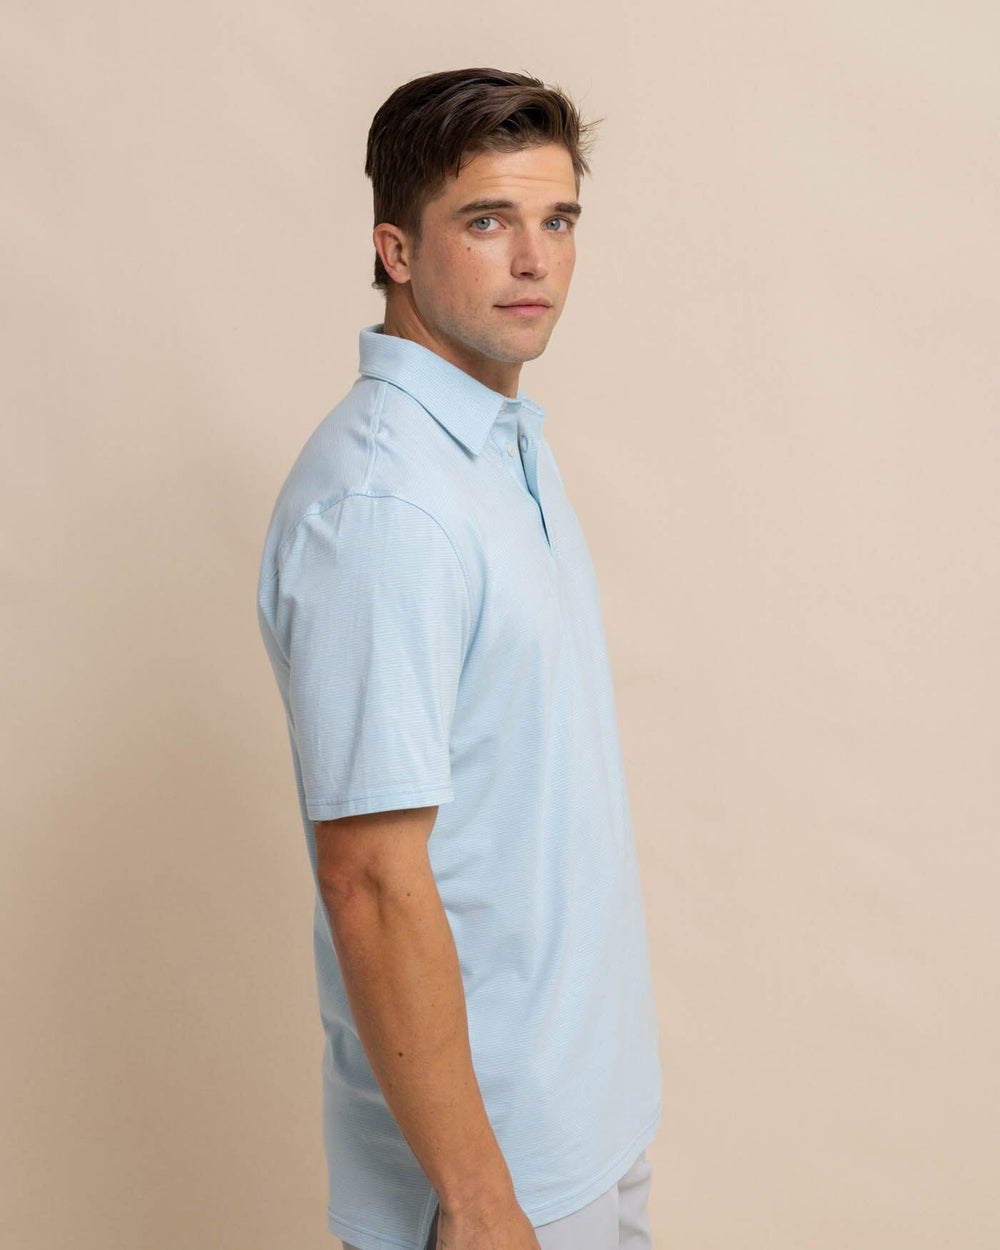 The front view of the Southern Tide The Seaport Davenport Stripe Polo by Southern Tide - Clearwater Blue